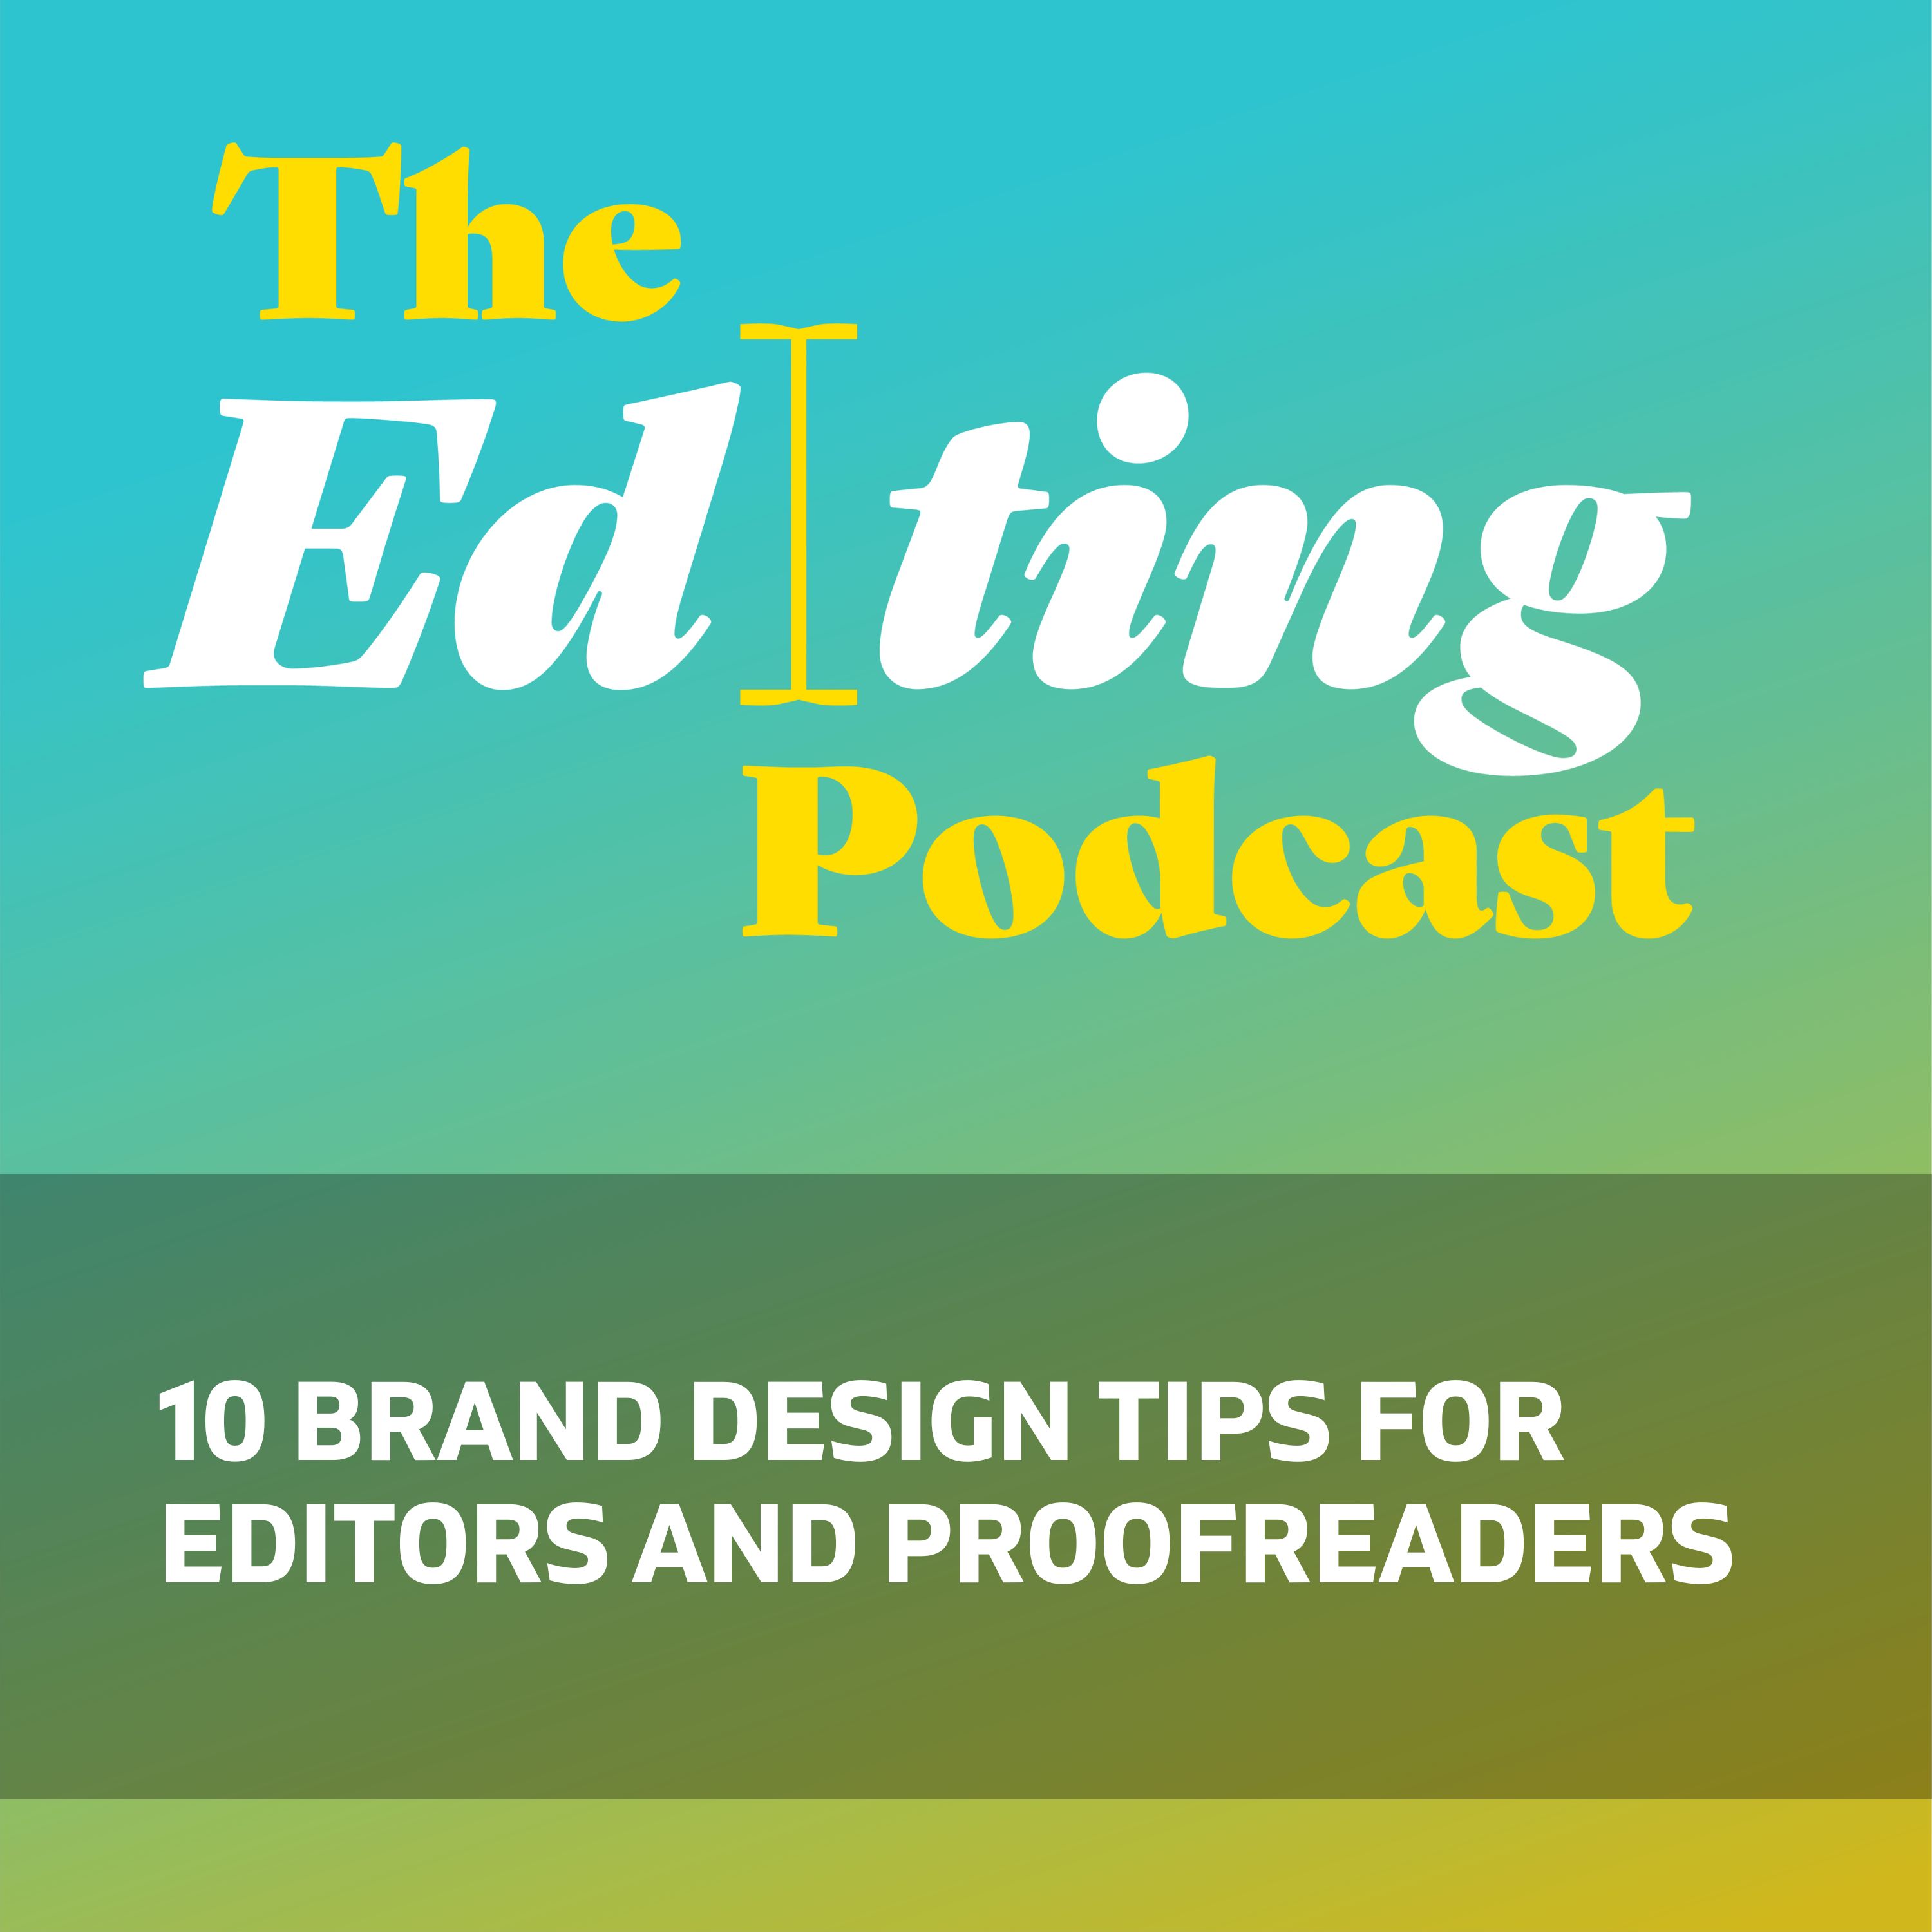 10 brand design tips for editors and proofreaders